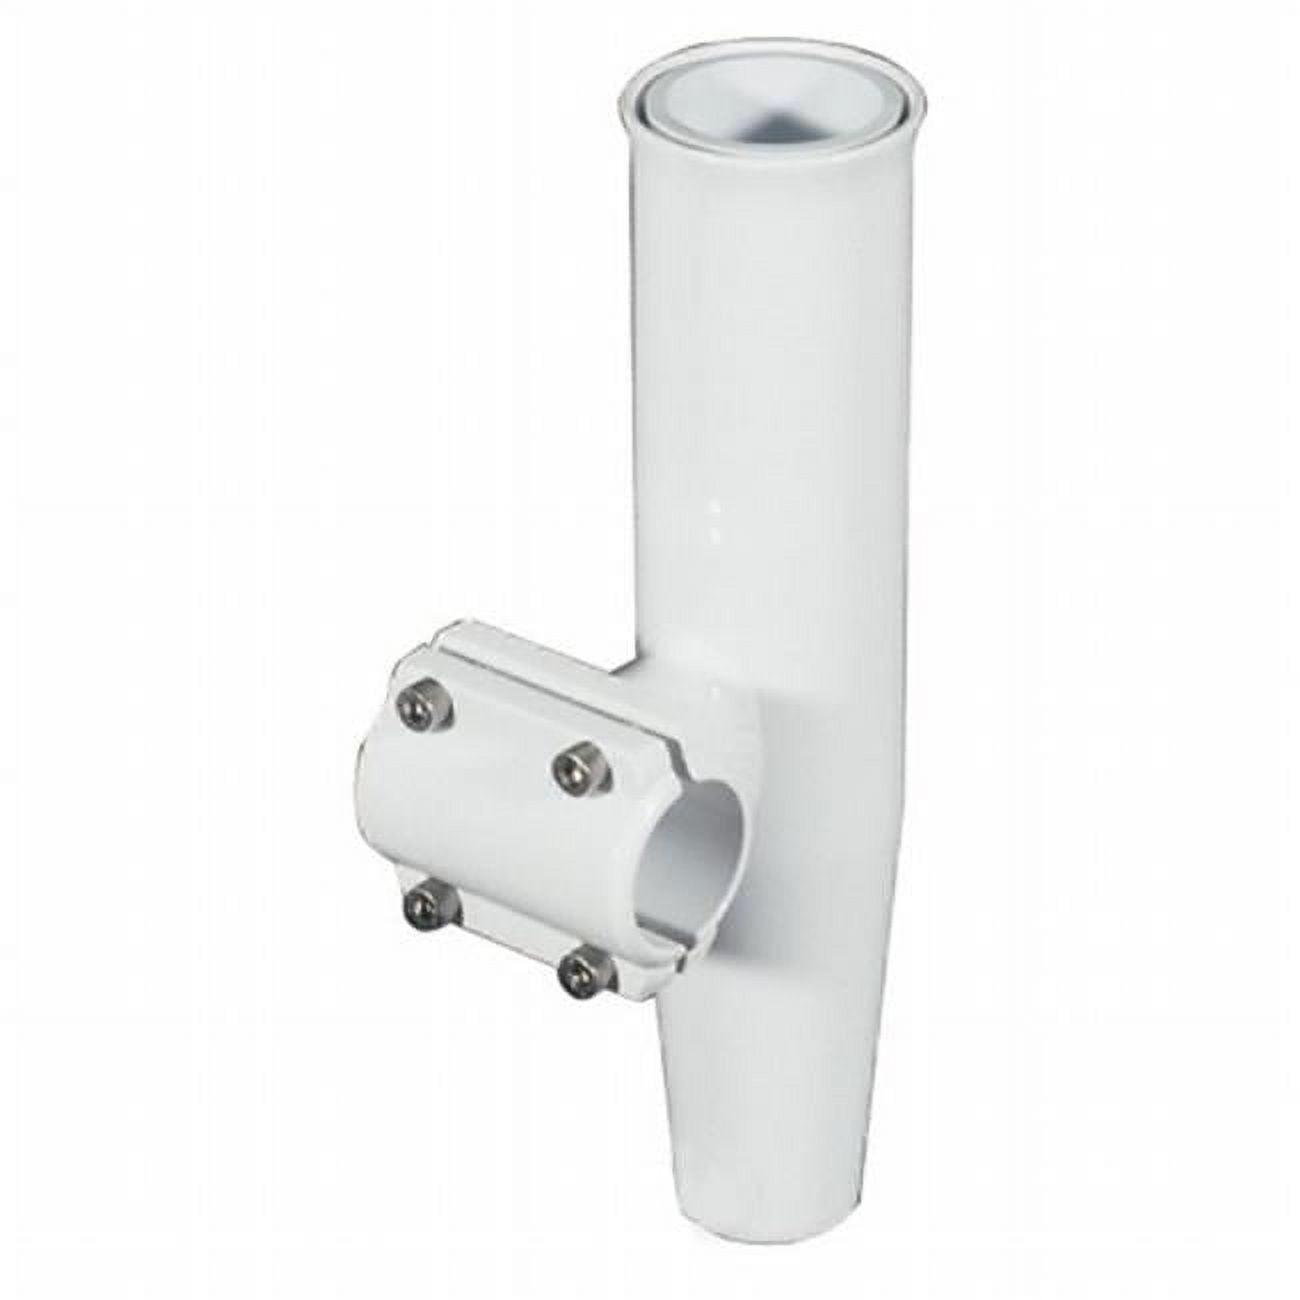 Lee's Tackle Inc. 17857534 Lee's Clamp-on Rod Holder - White Aluminum -  Horizontal Mount - Fits 1.050 O.d. Pipe